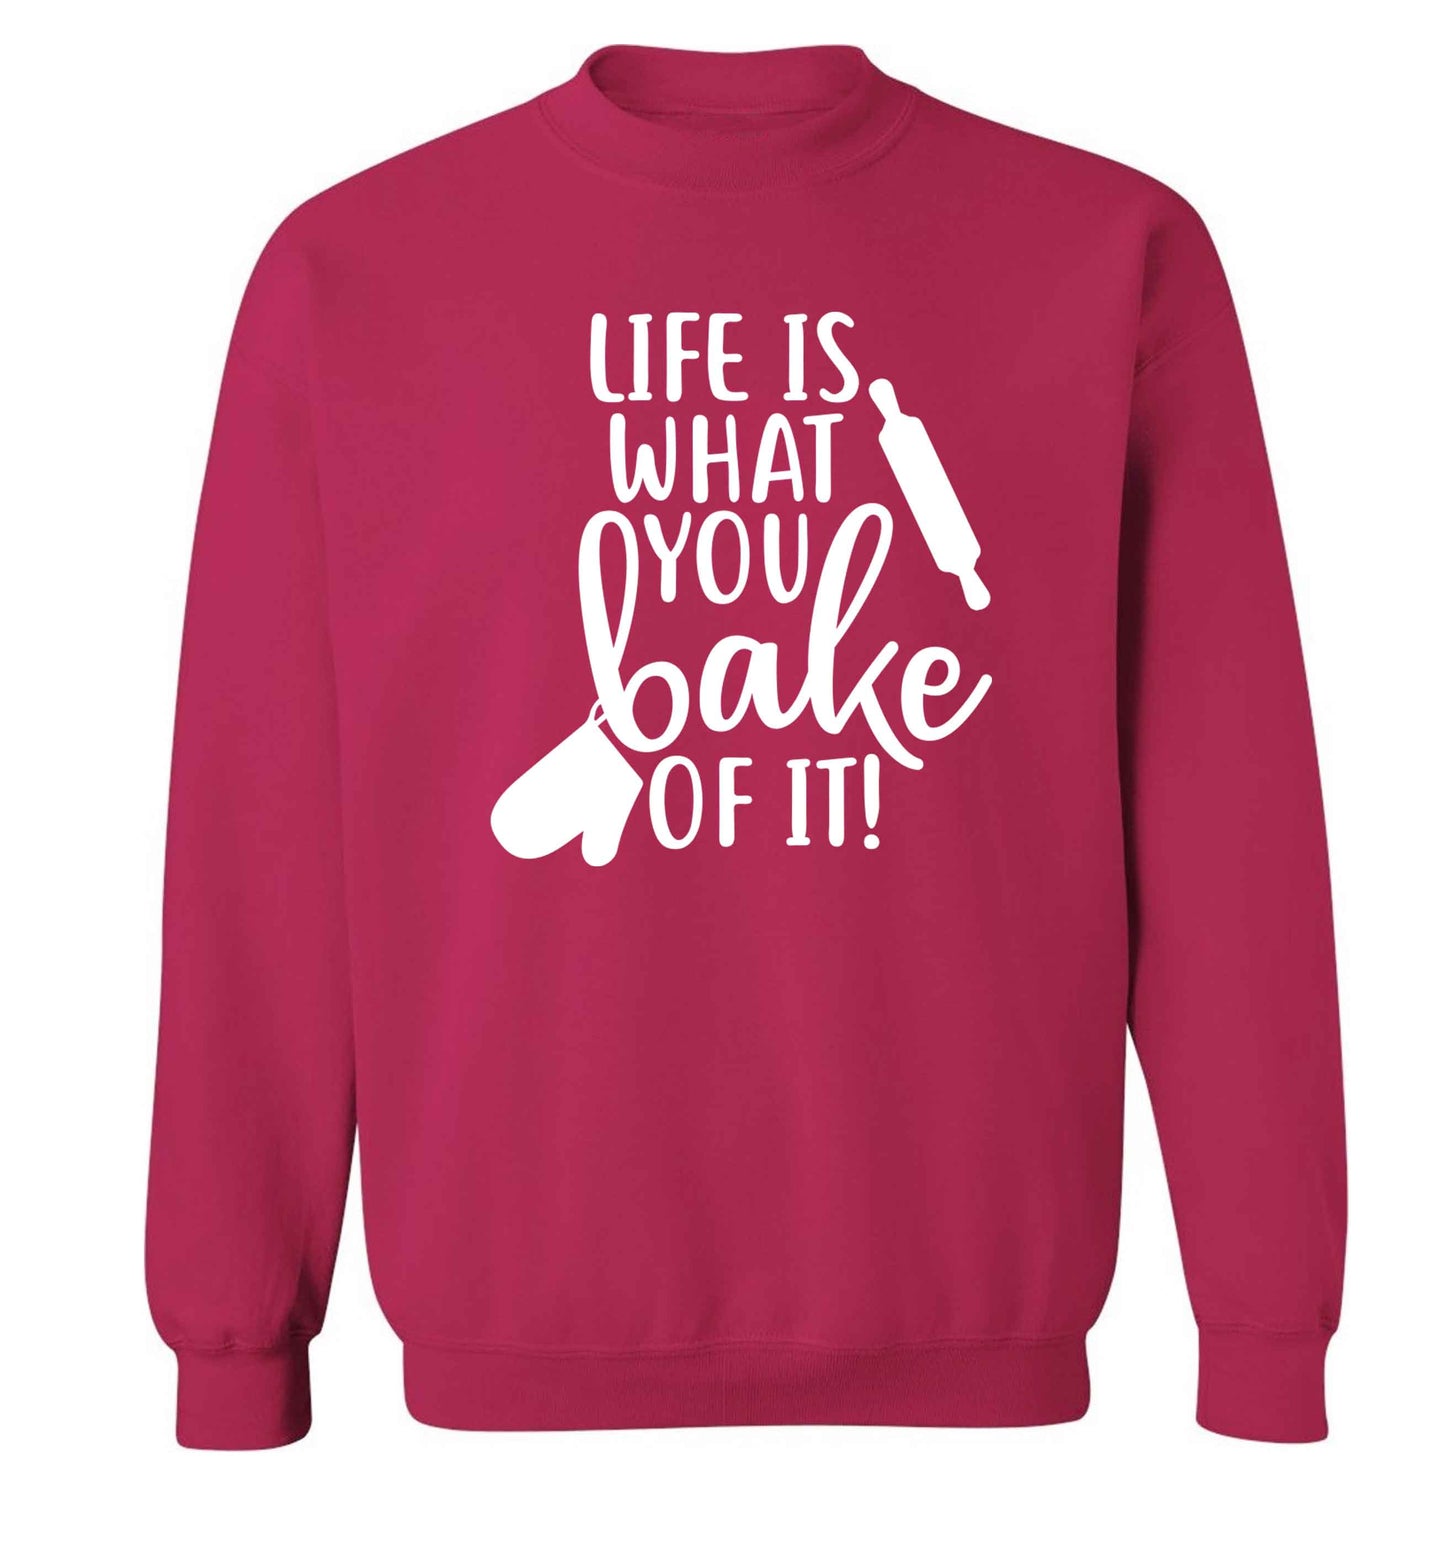 Life is what you bake of it Adult's unisex pink Sweater 2XL